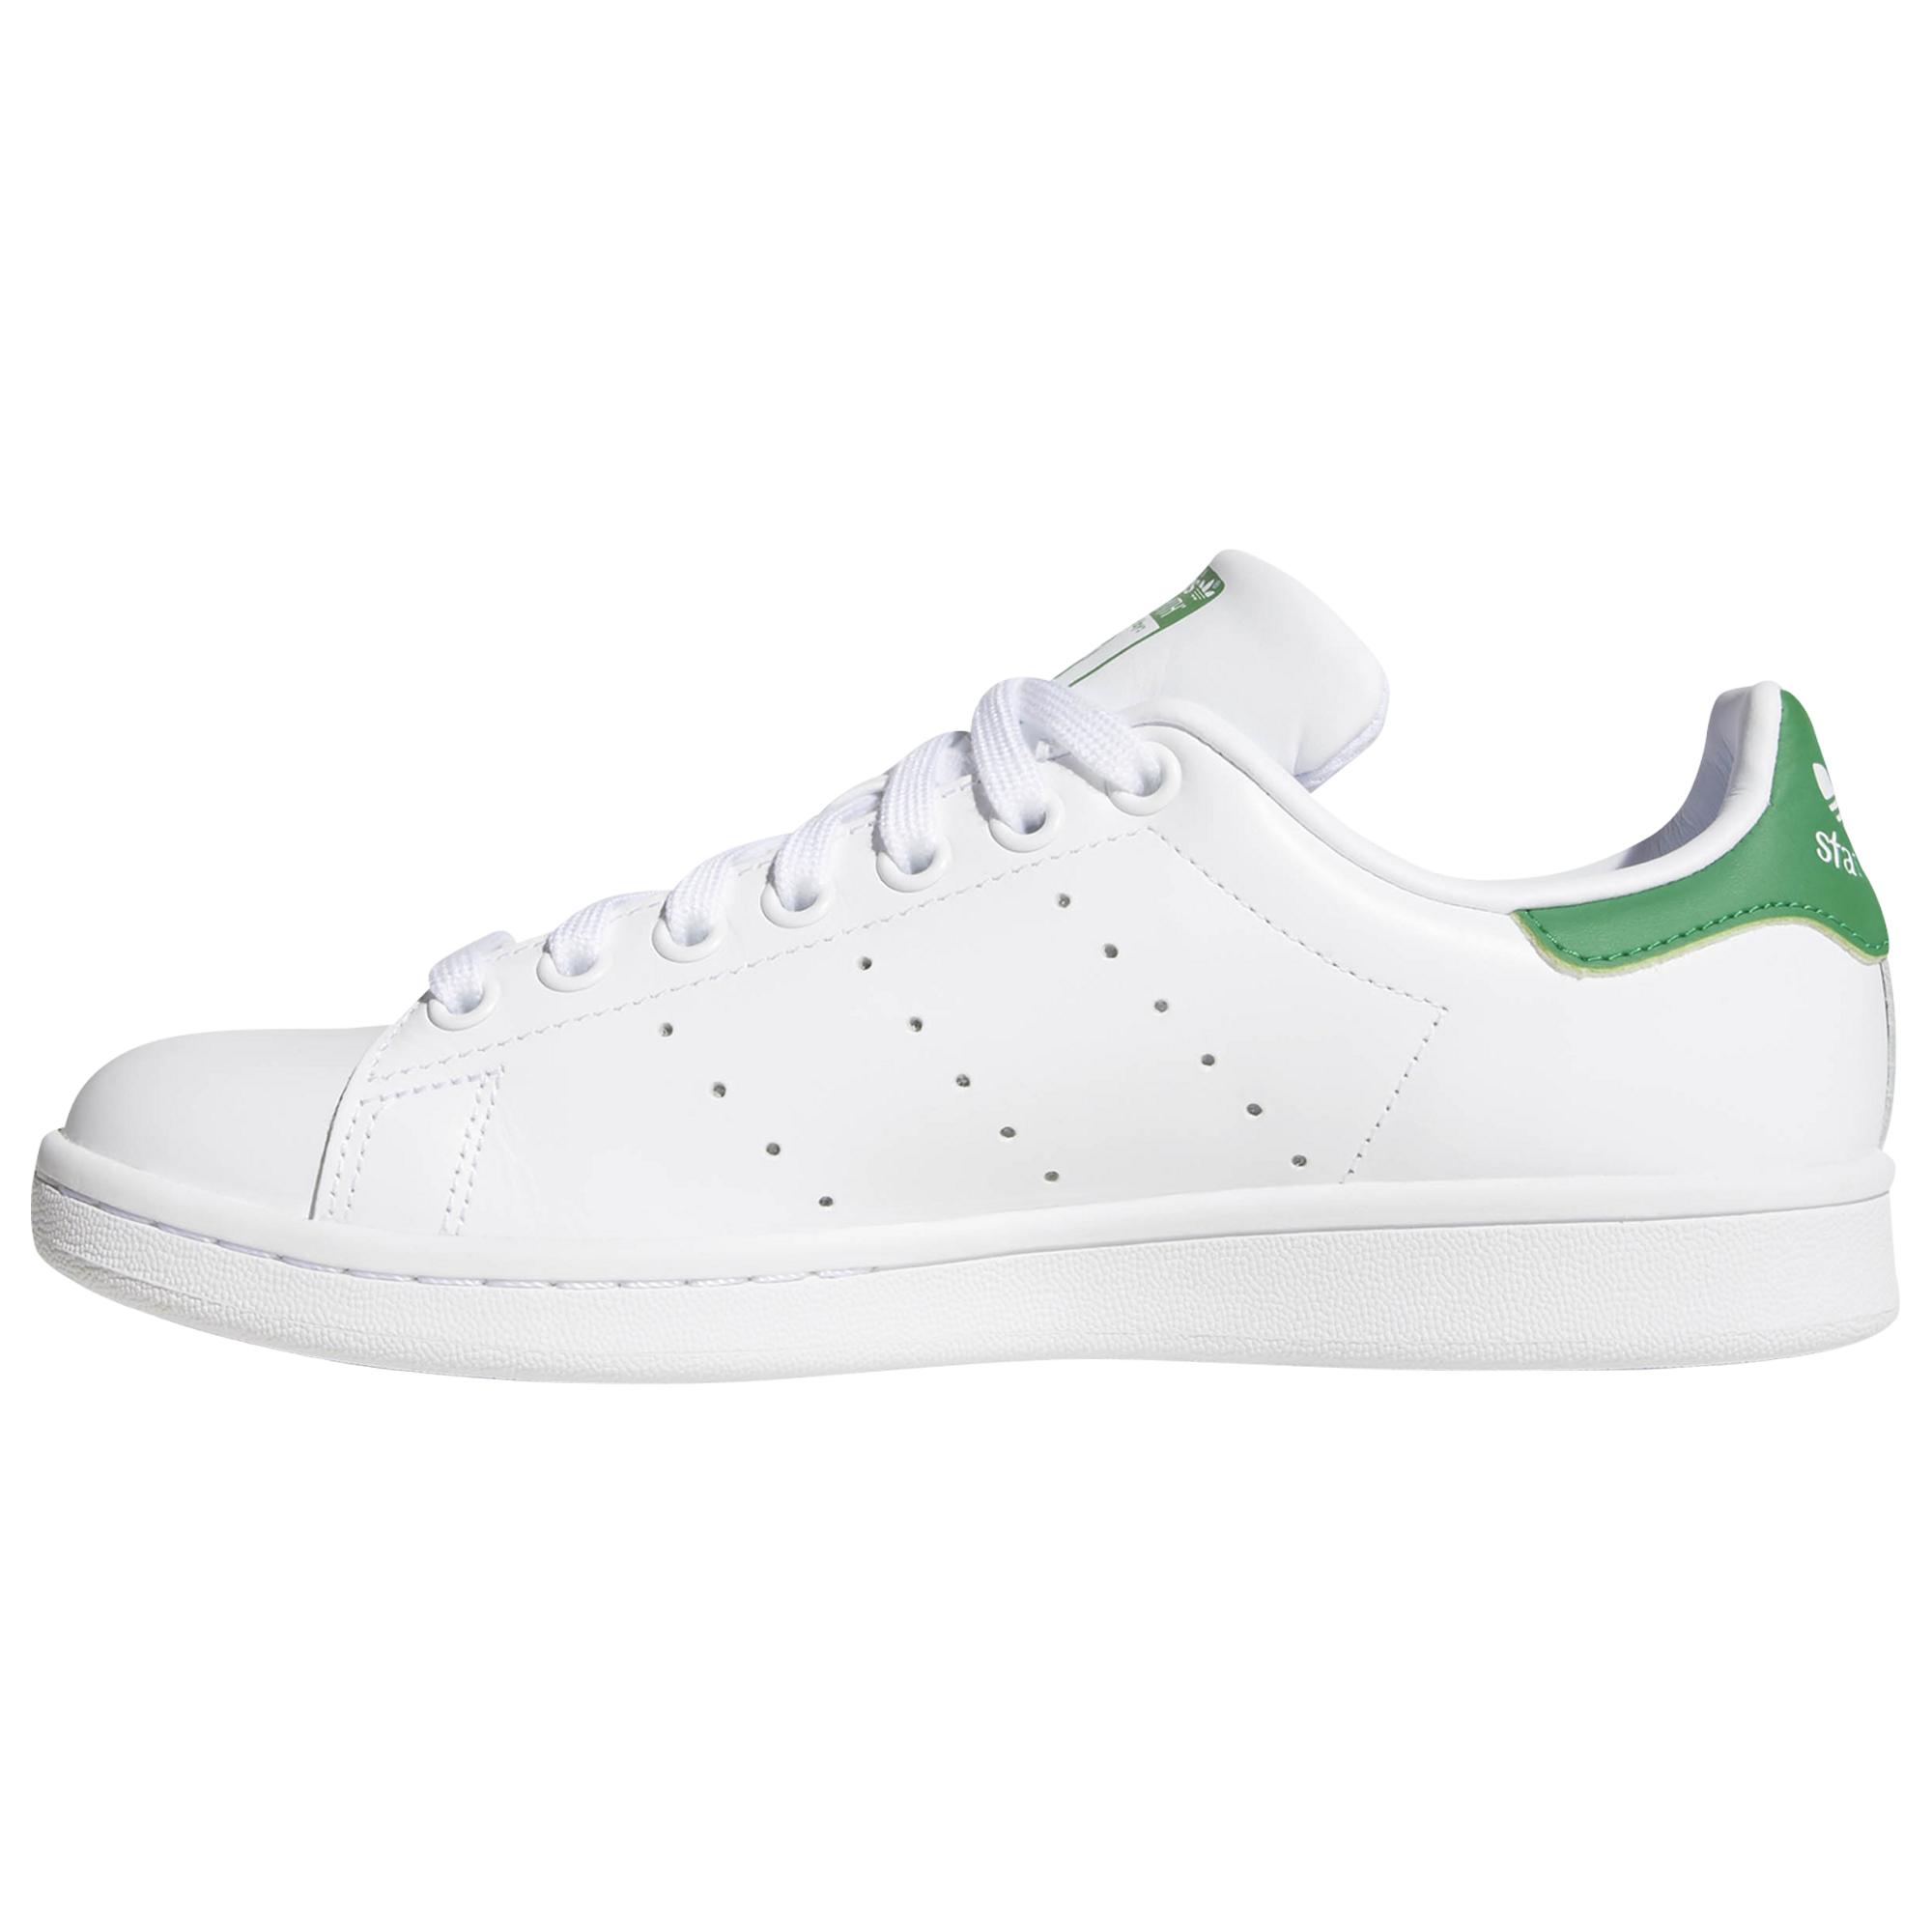 adidas Originals Leather Stan Smith Tennis Shoes in White for Men - Lyst